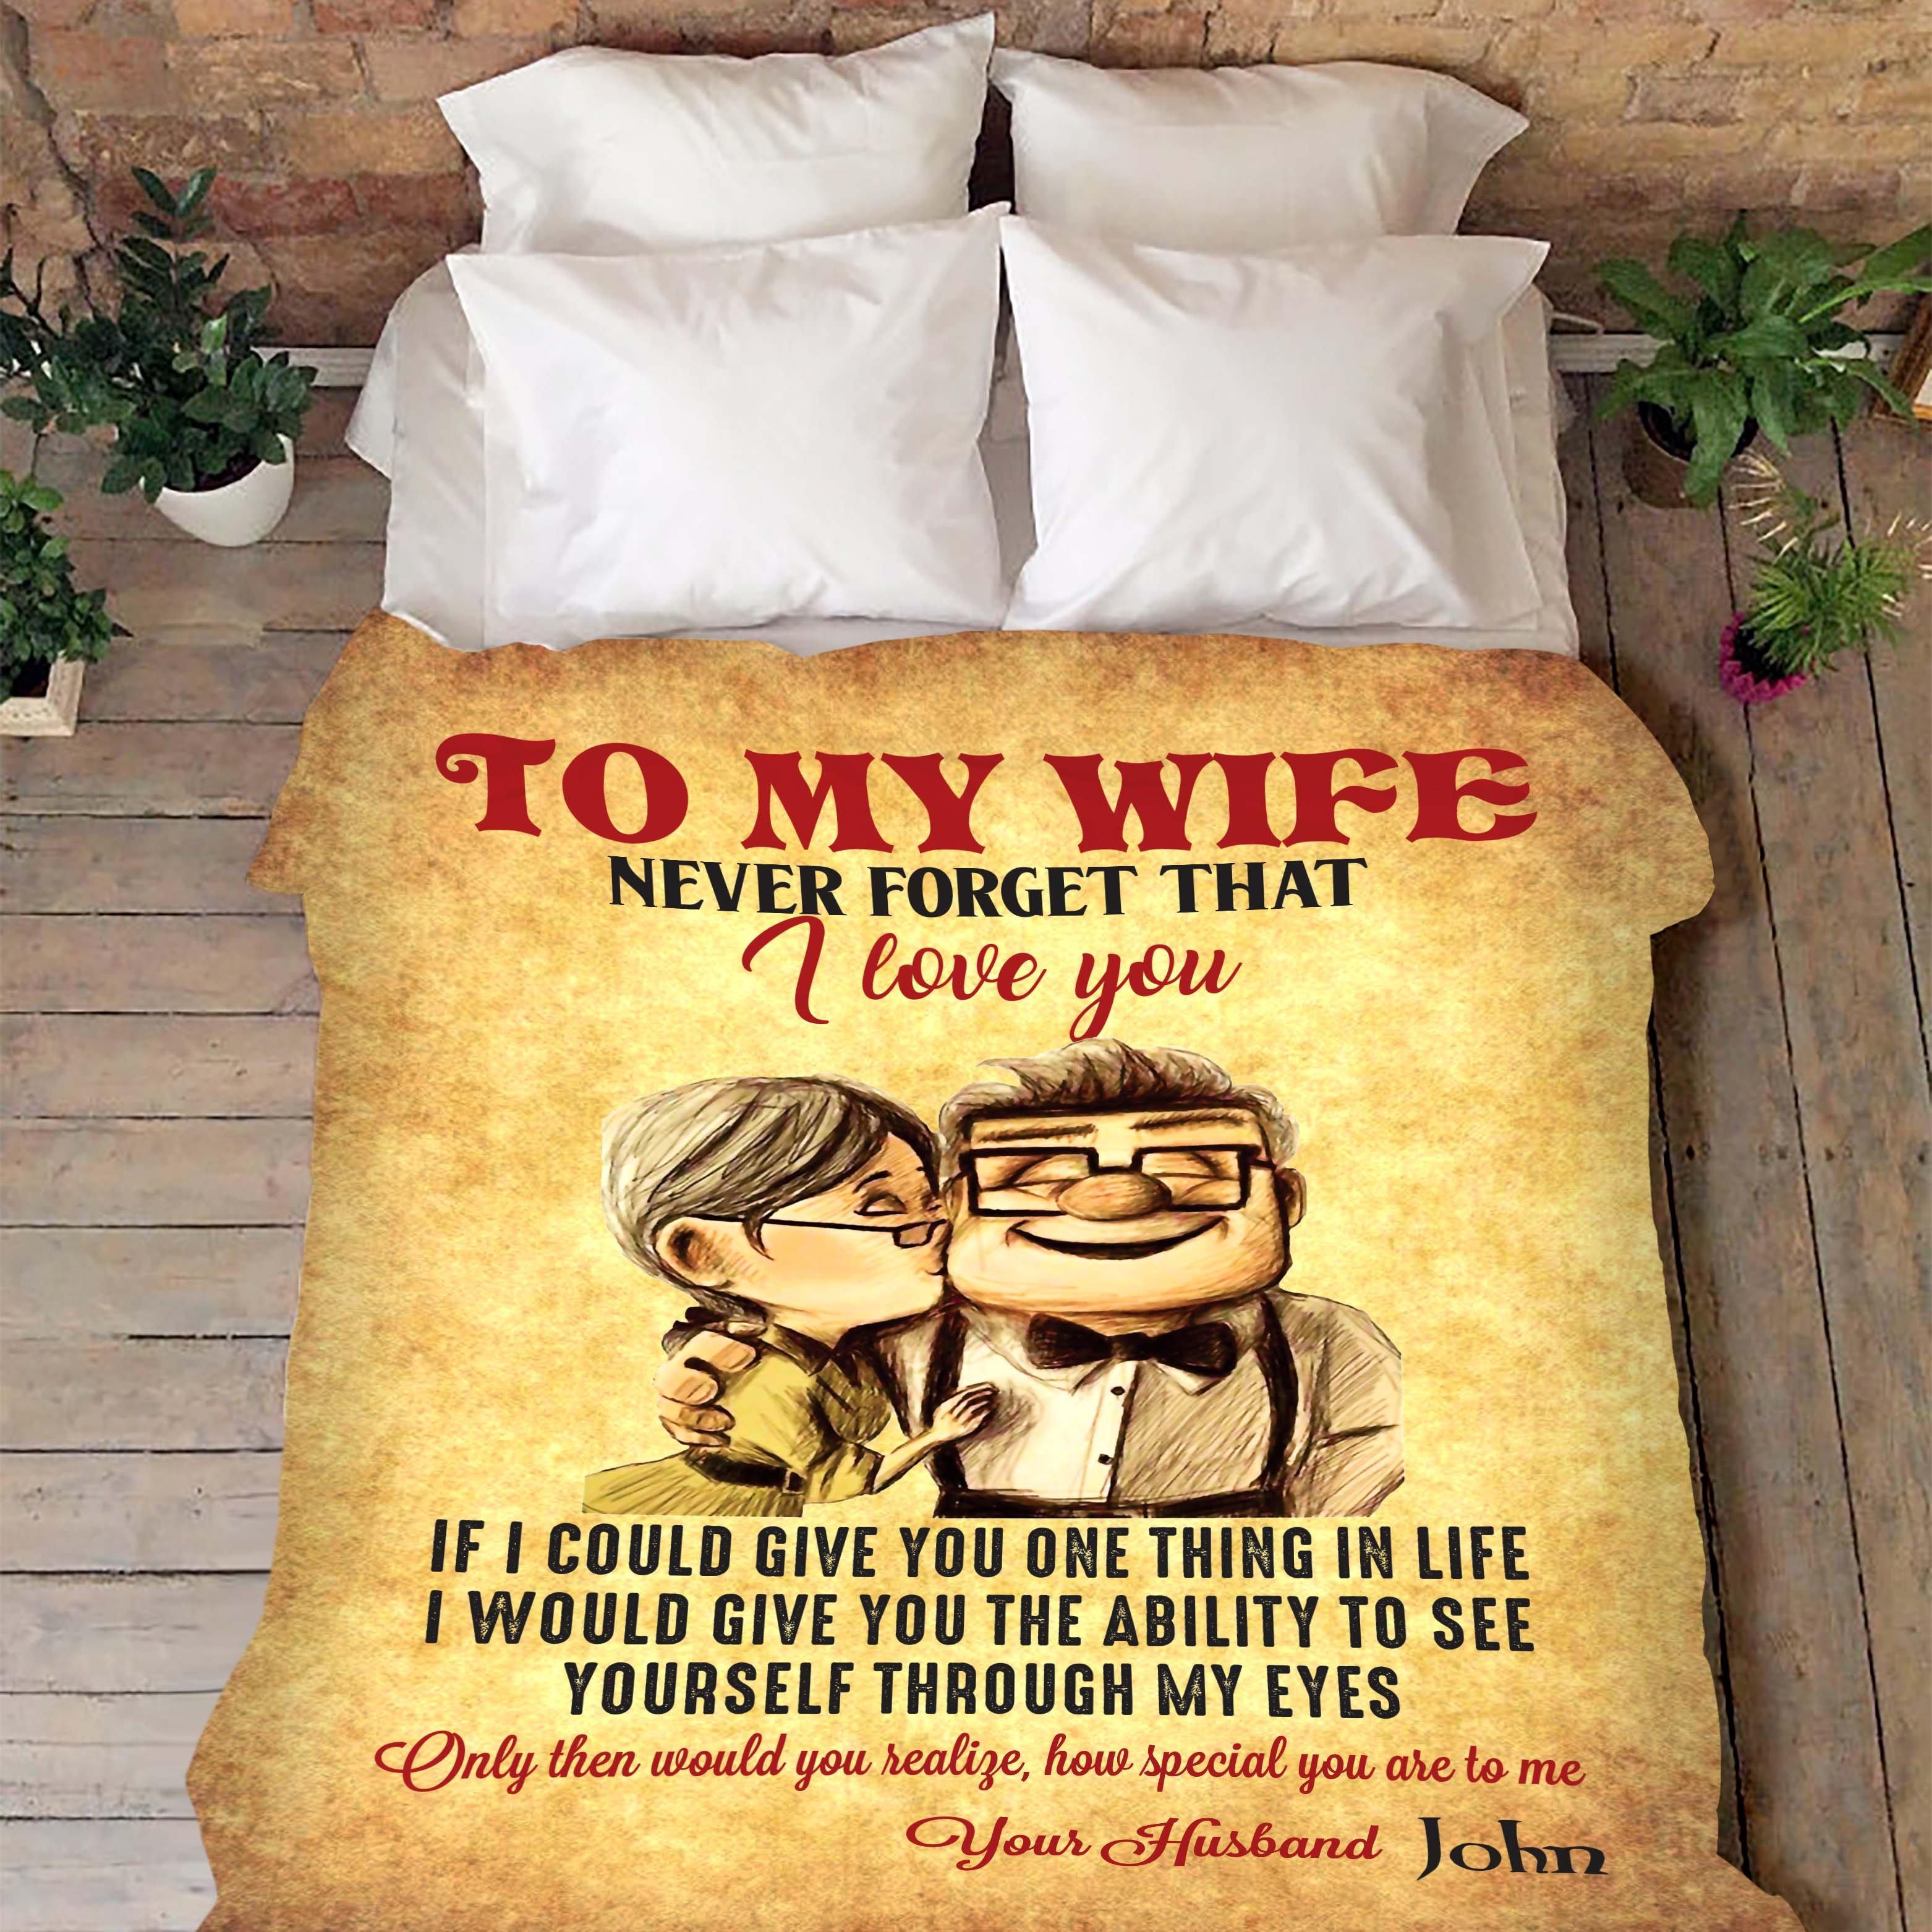 Up movie to my wife never forget that I love you blanket - size 60x80